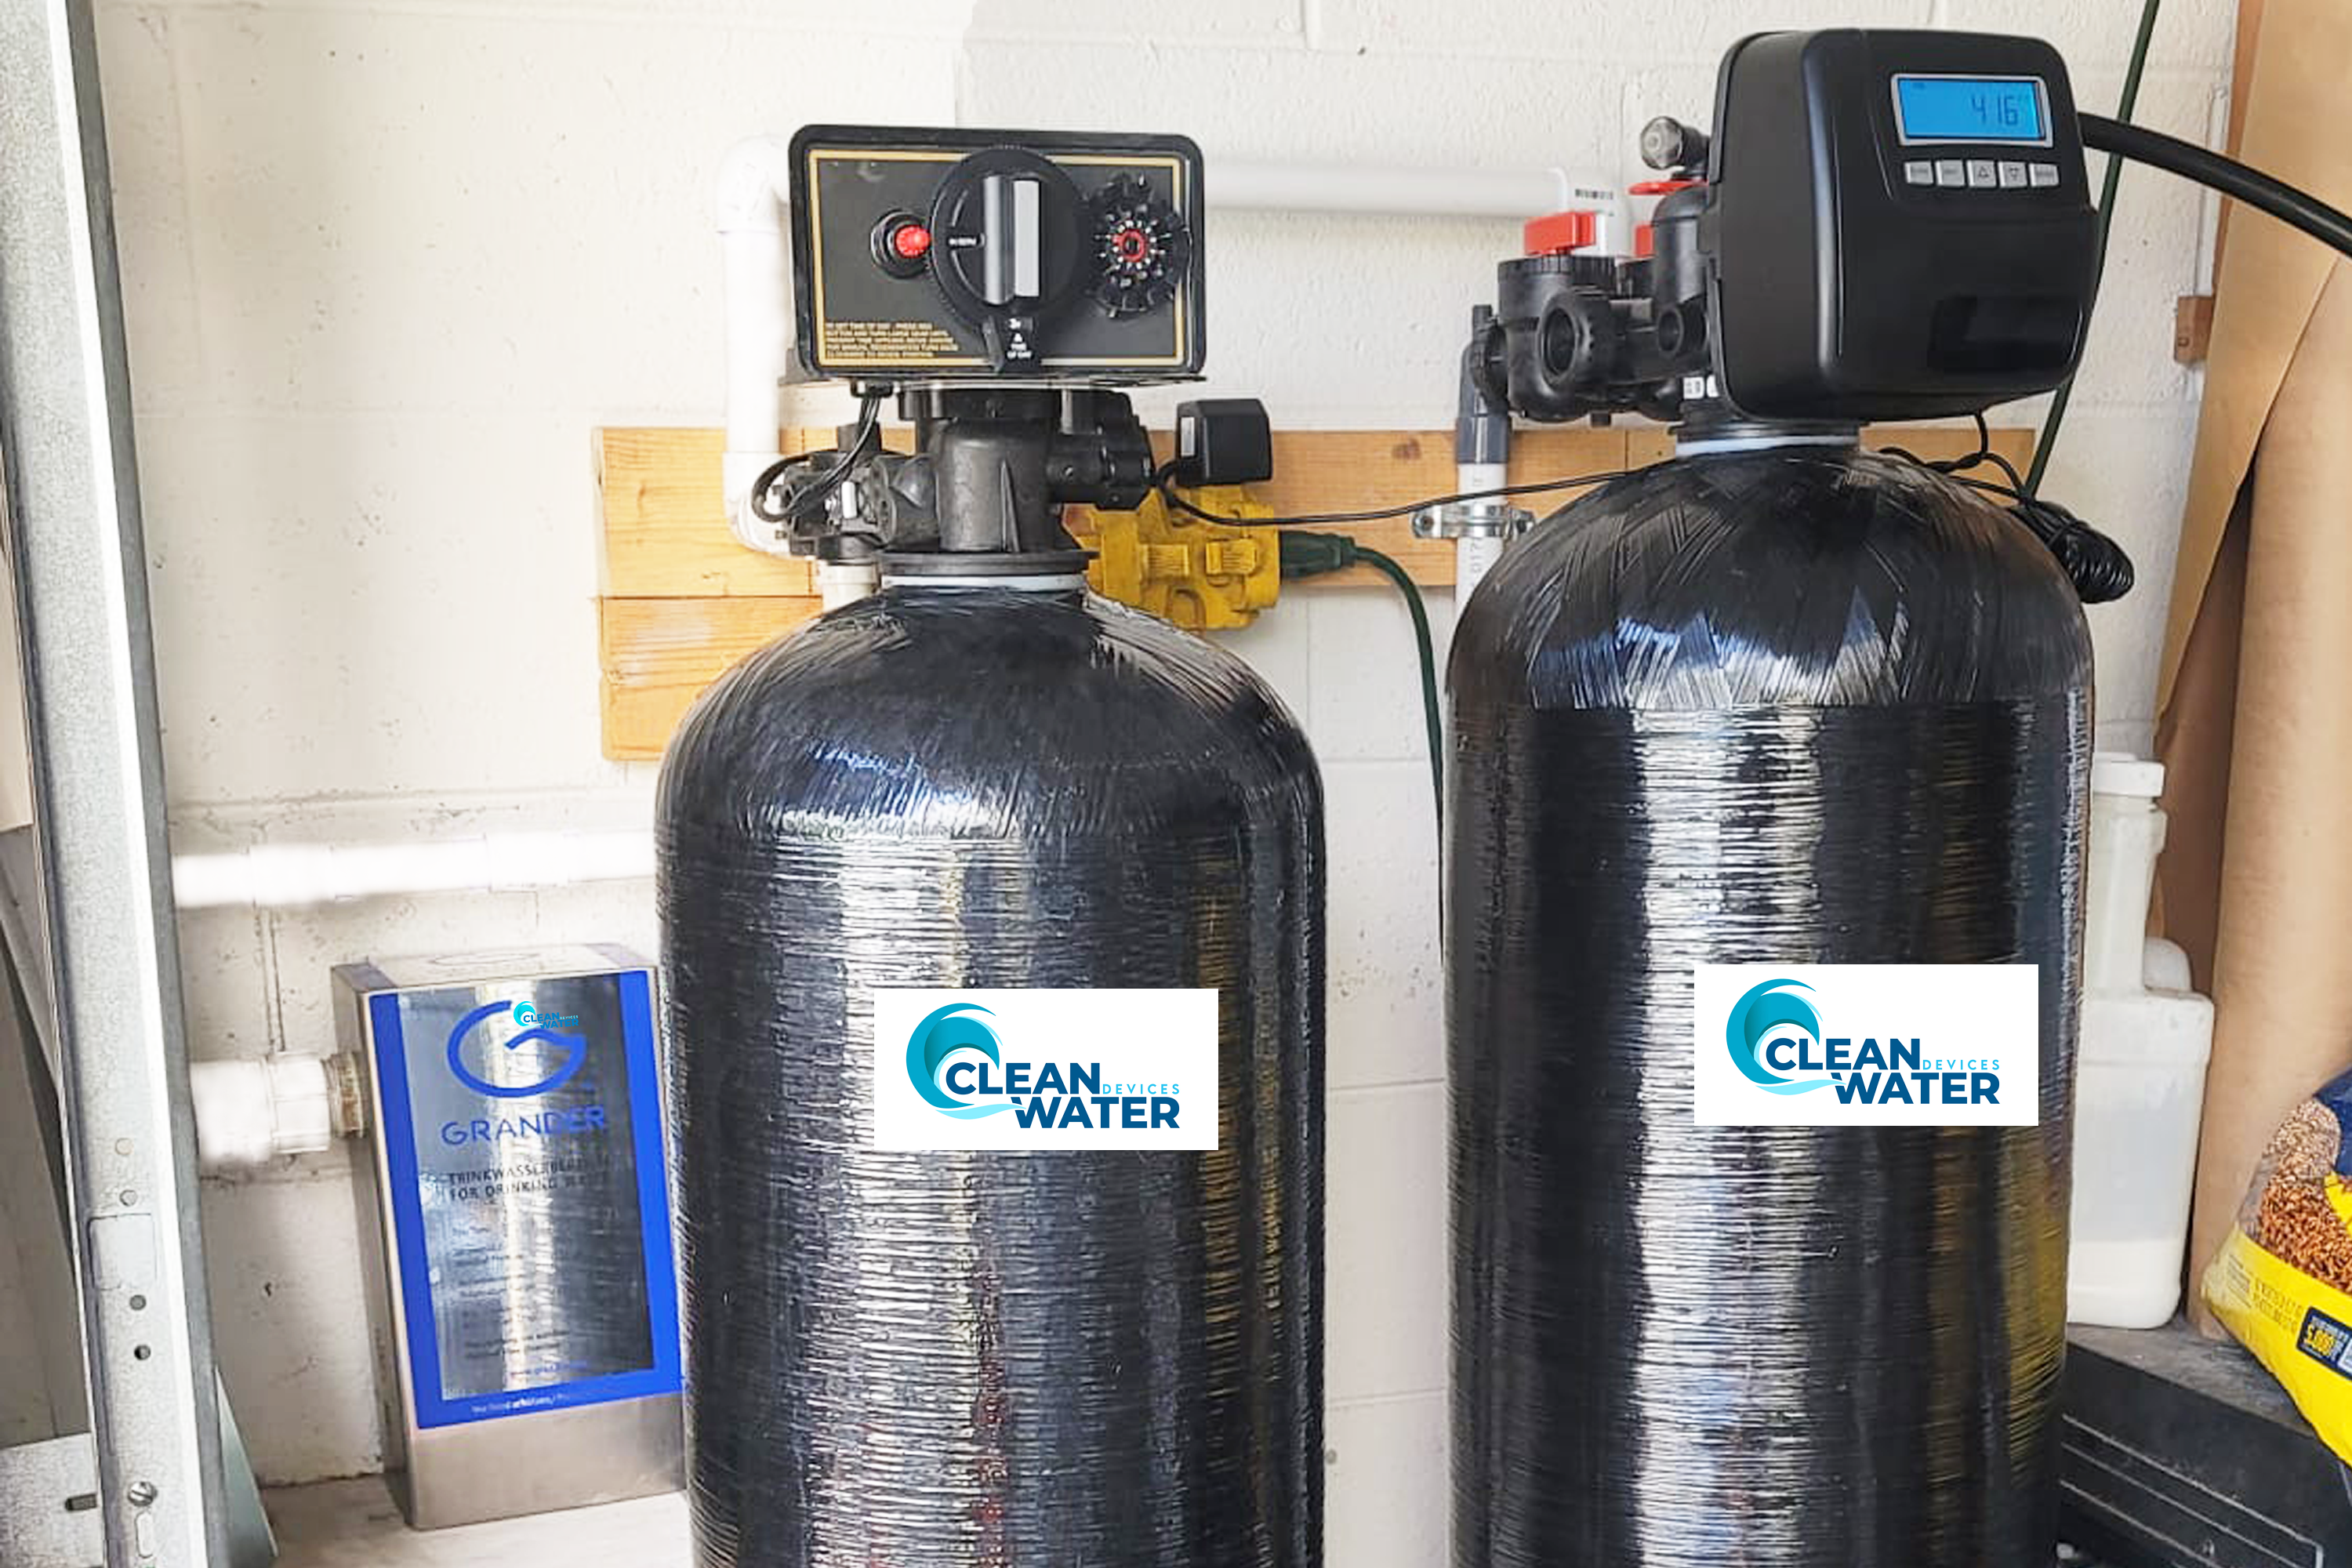 Alabama Water Filters, best filtration system in Alabama